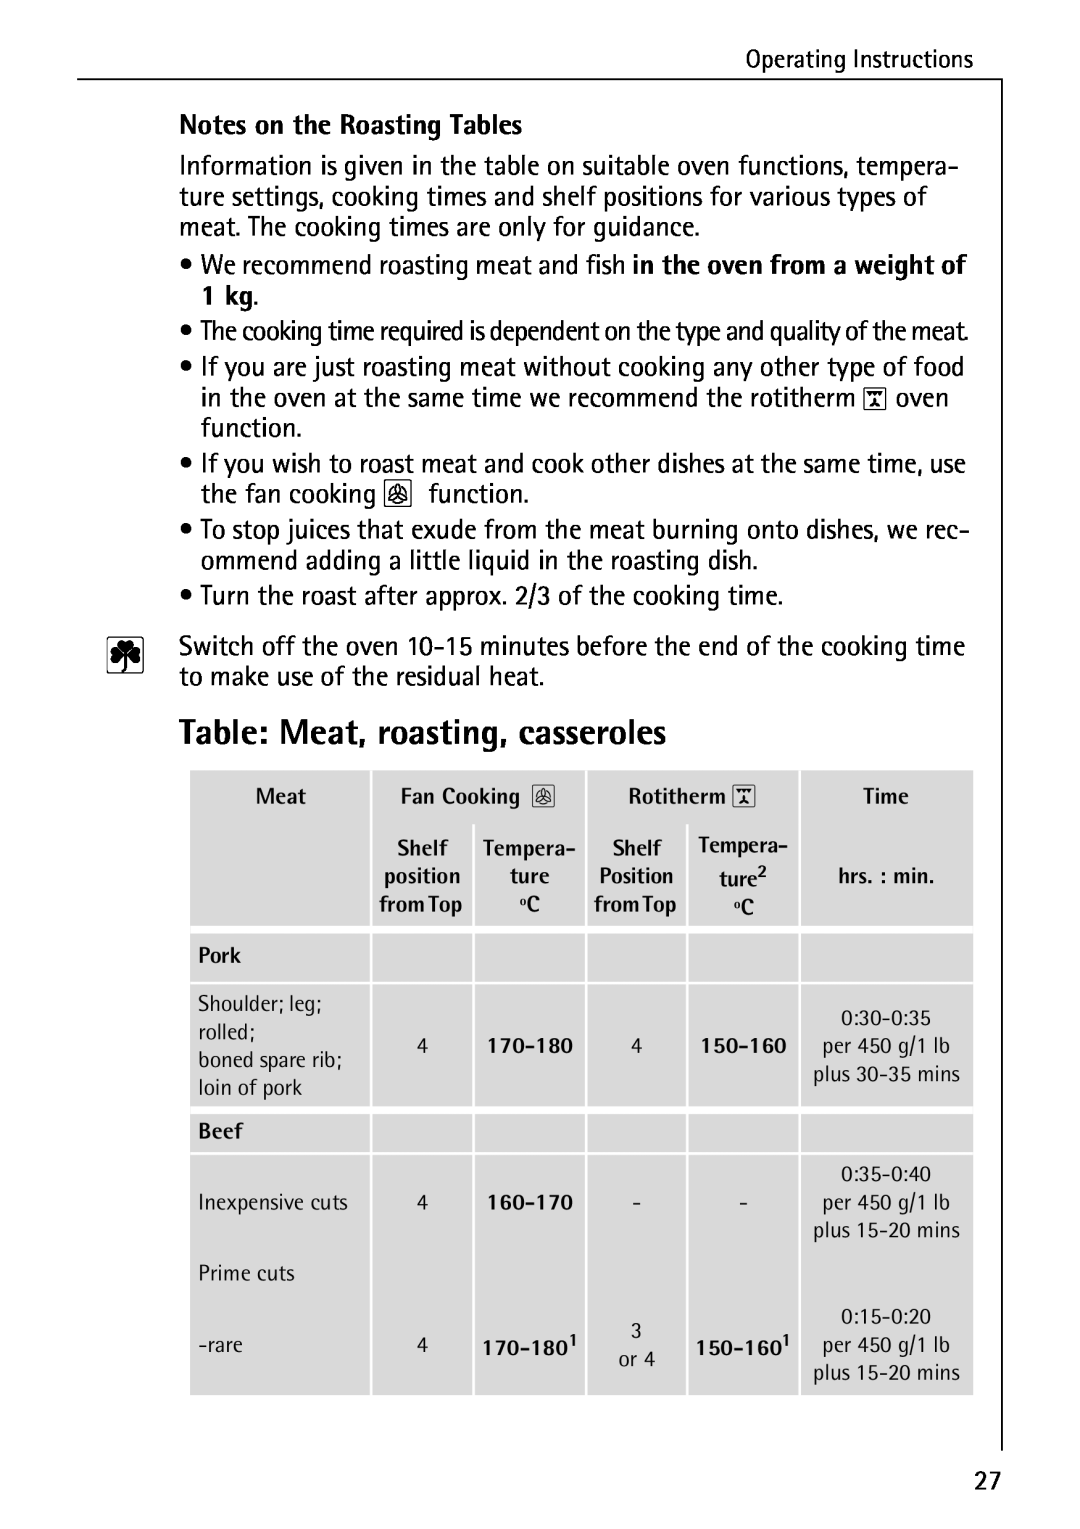 AEG B 2100 operating instructions Table Meat, roasting, casseroles, Notes on the Roasting Tables 